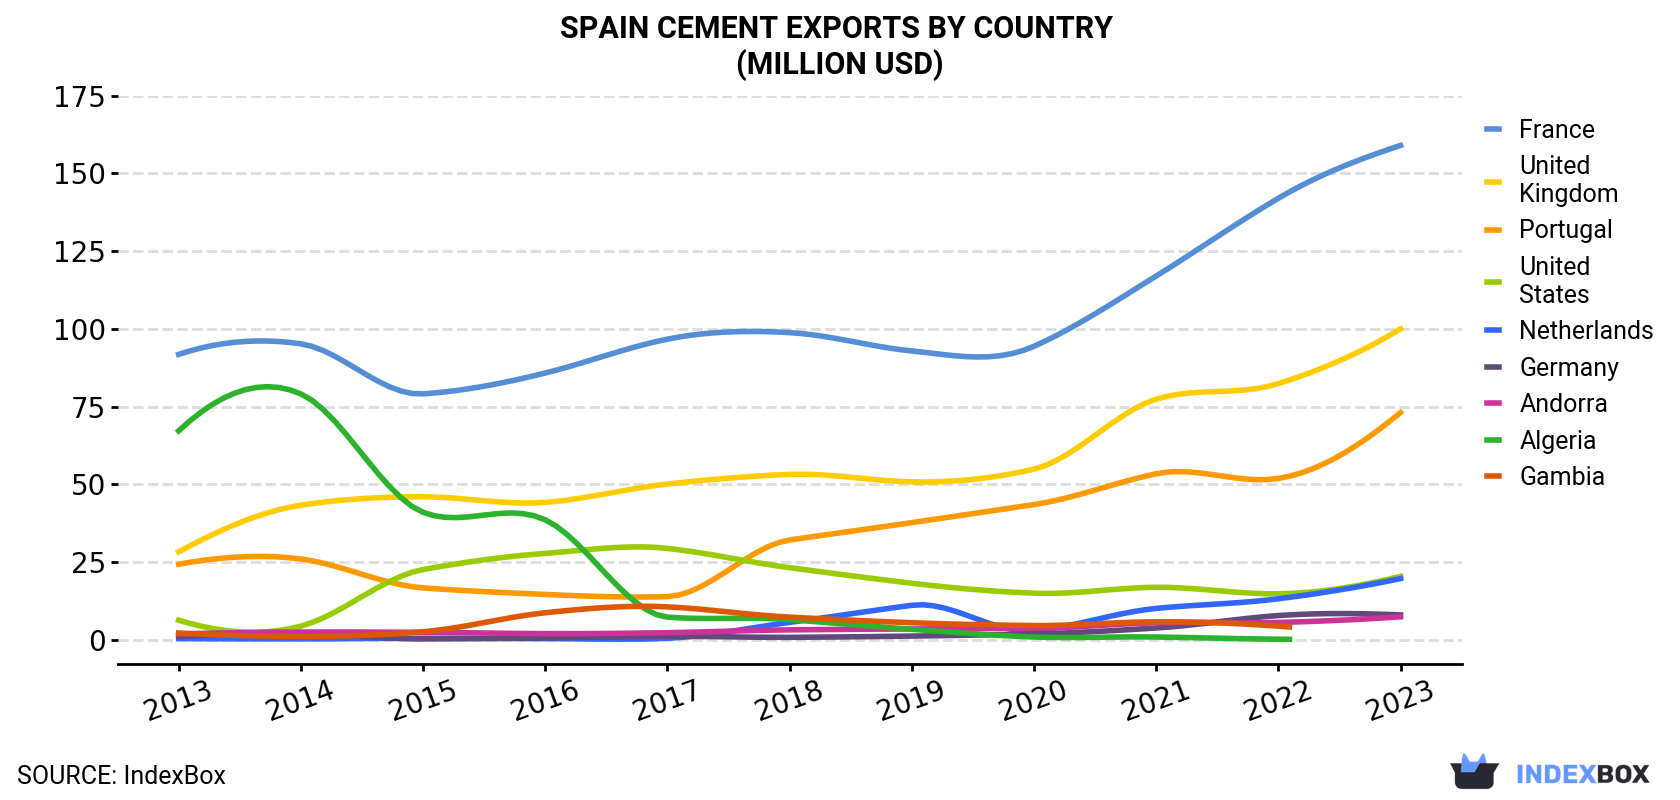 Spain Cement Exports By Country (Million USD)